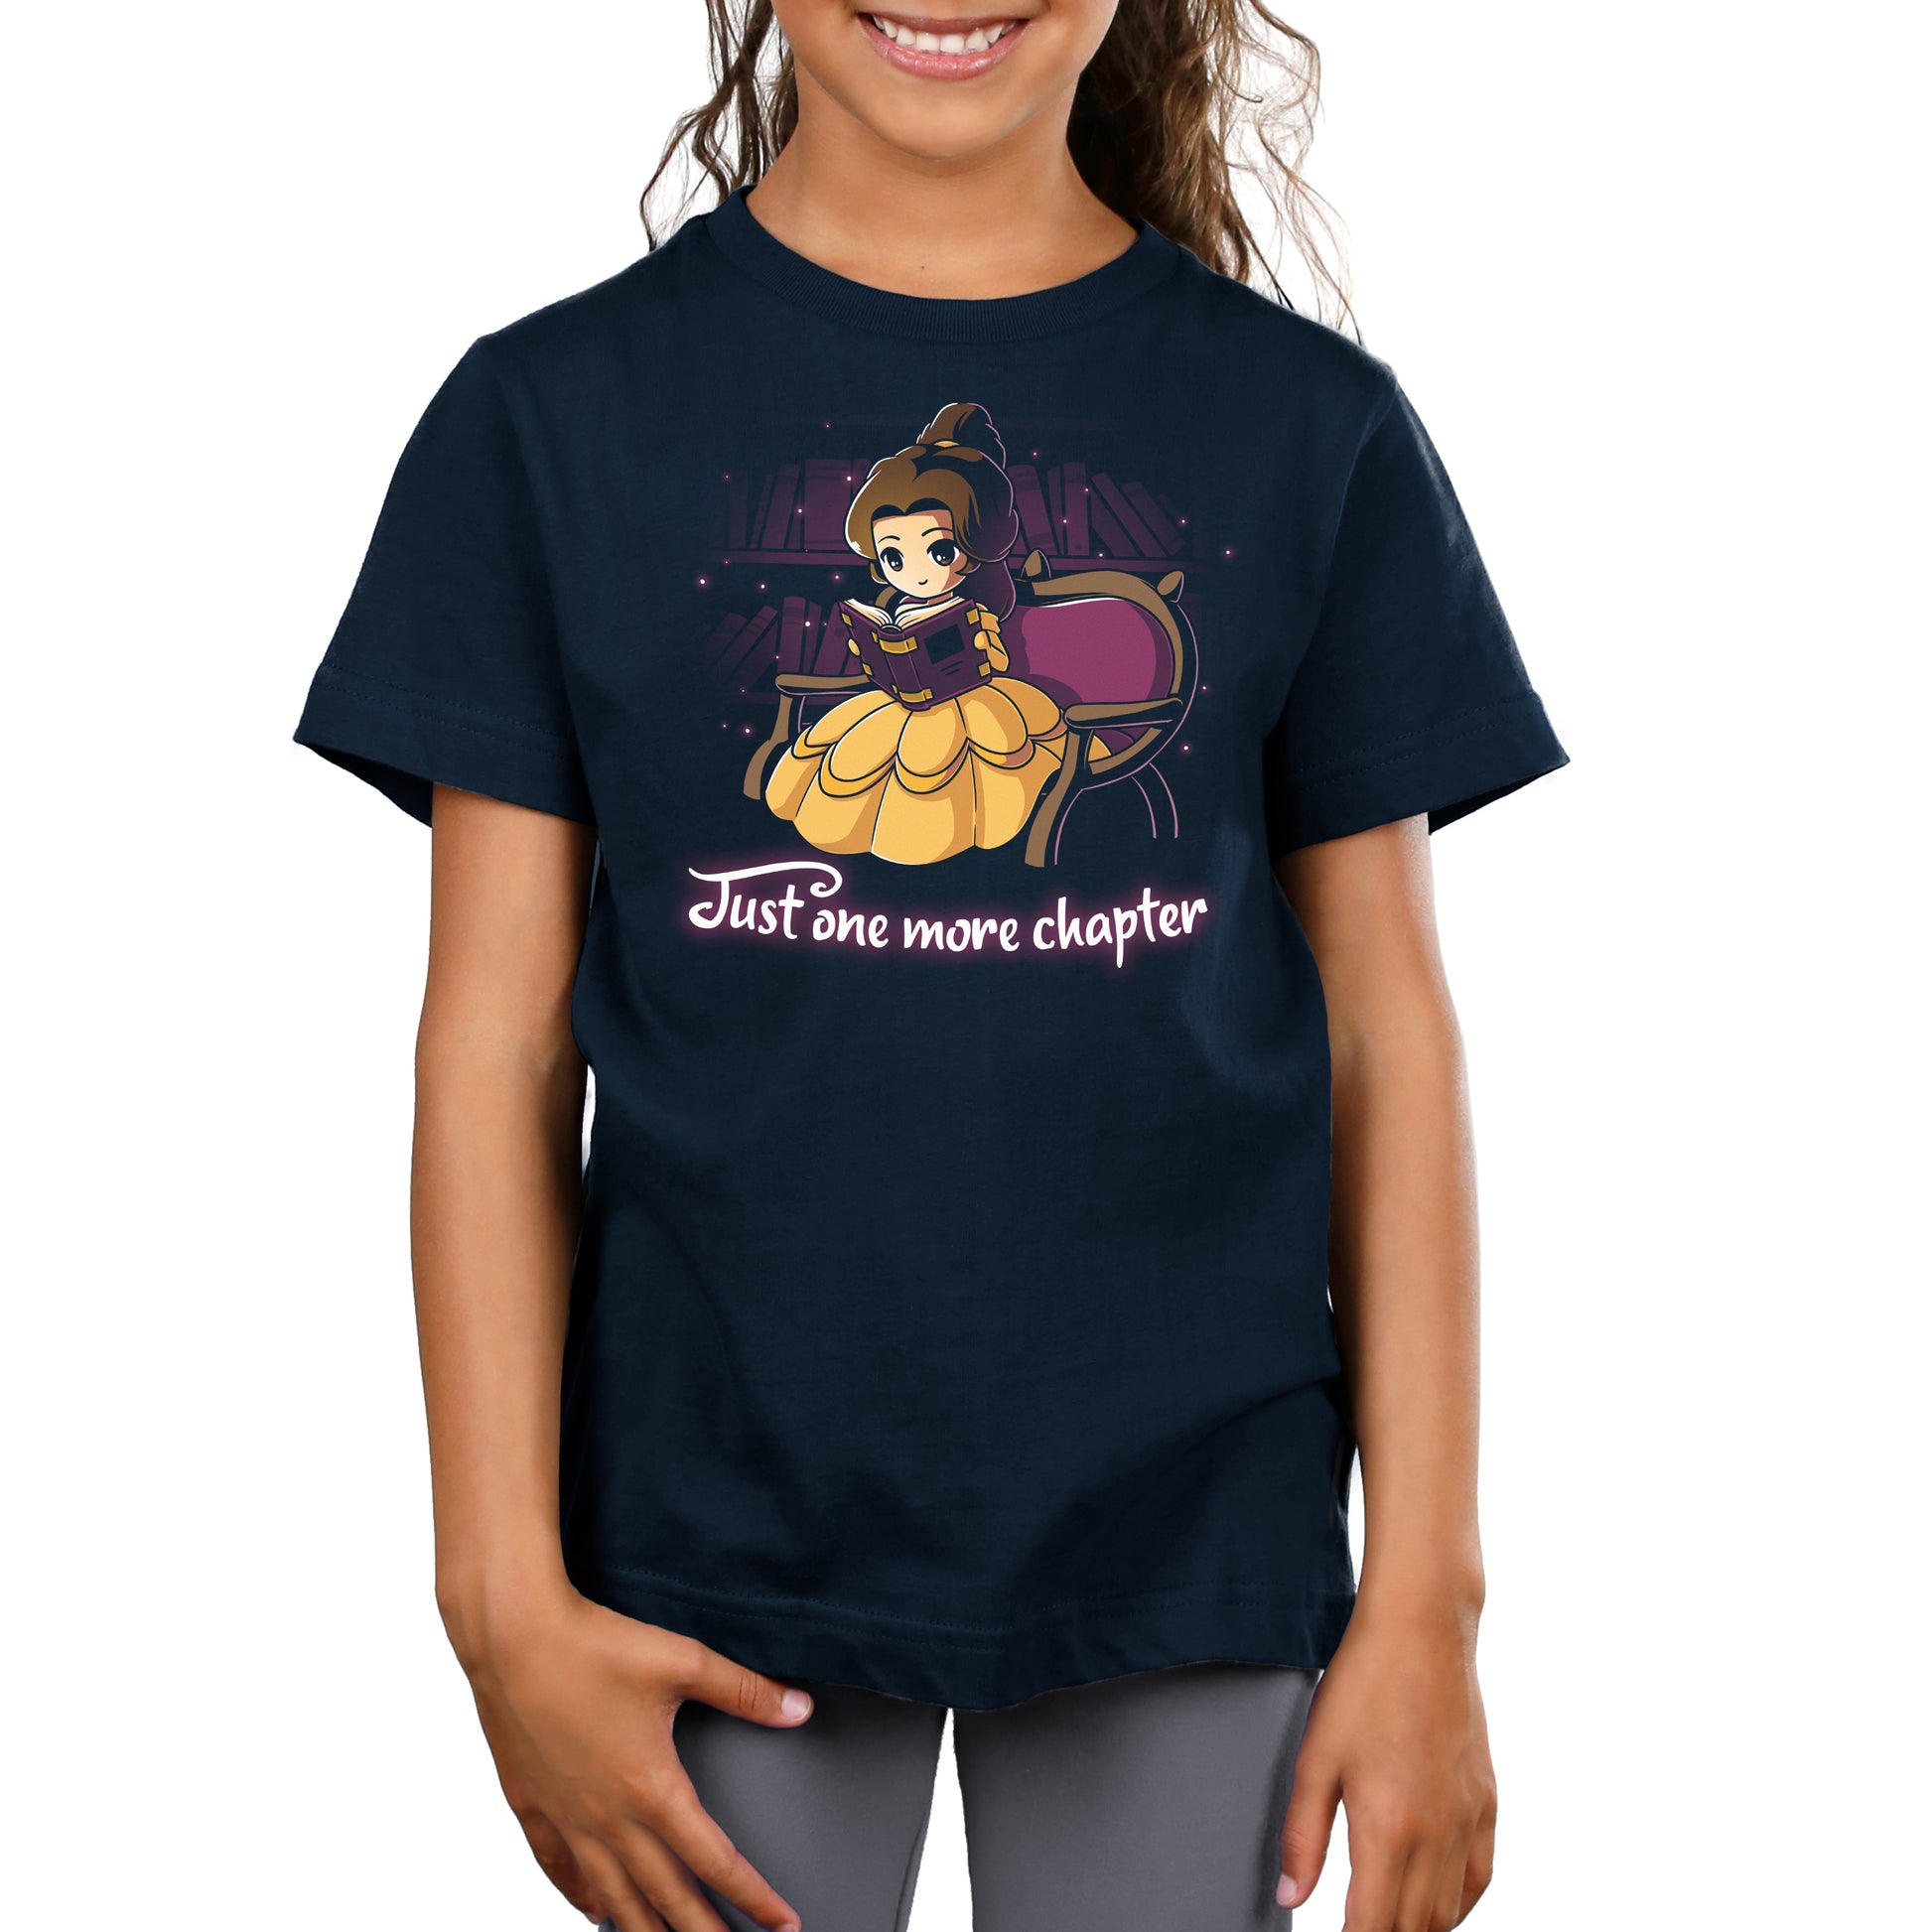 A Disney Belle-inspired girl smiling at the camera, wearing "Just One More Chapter" apparel.